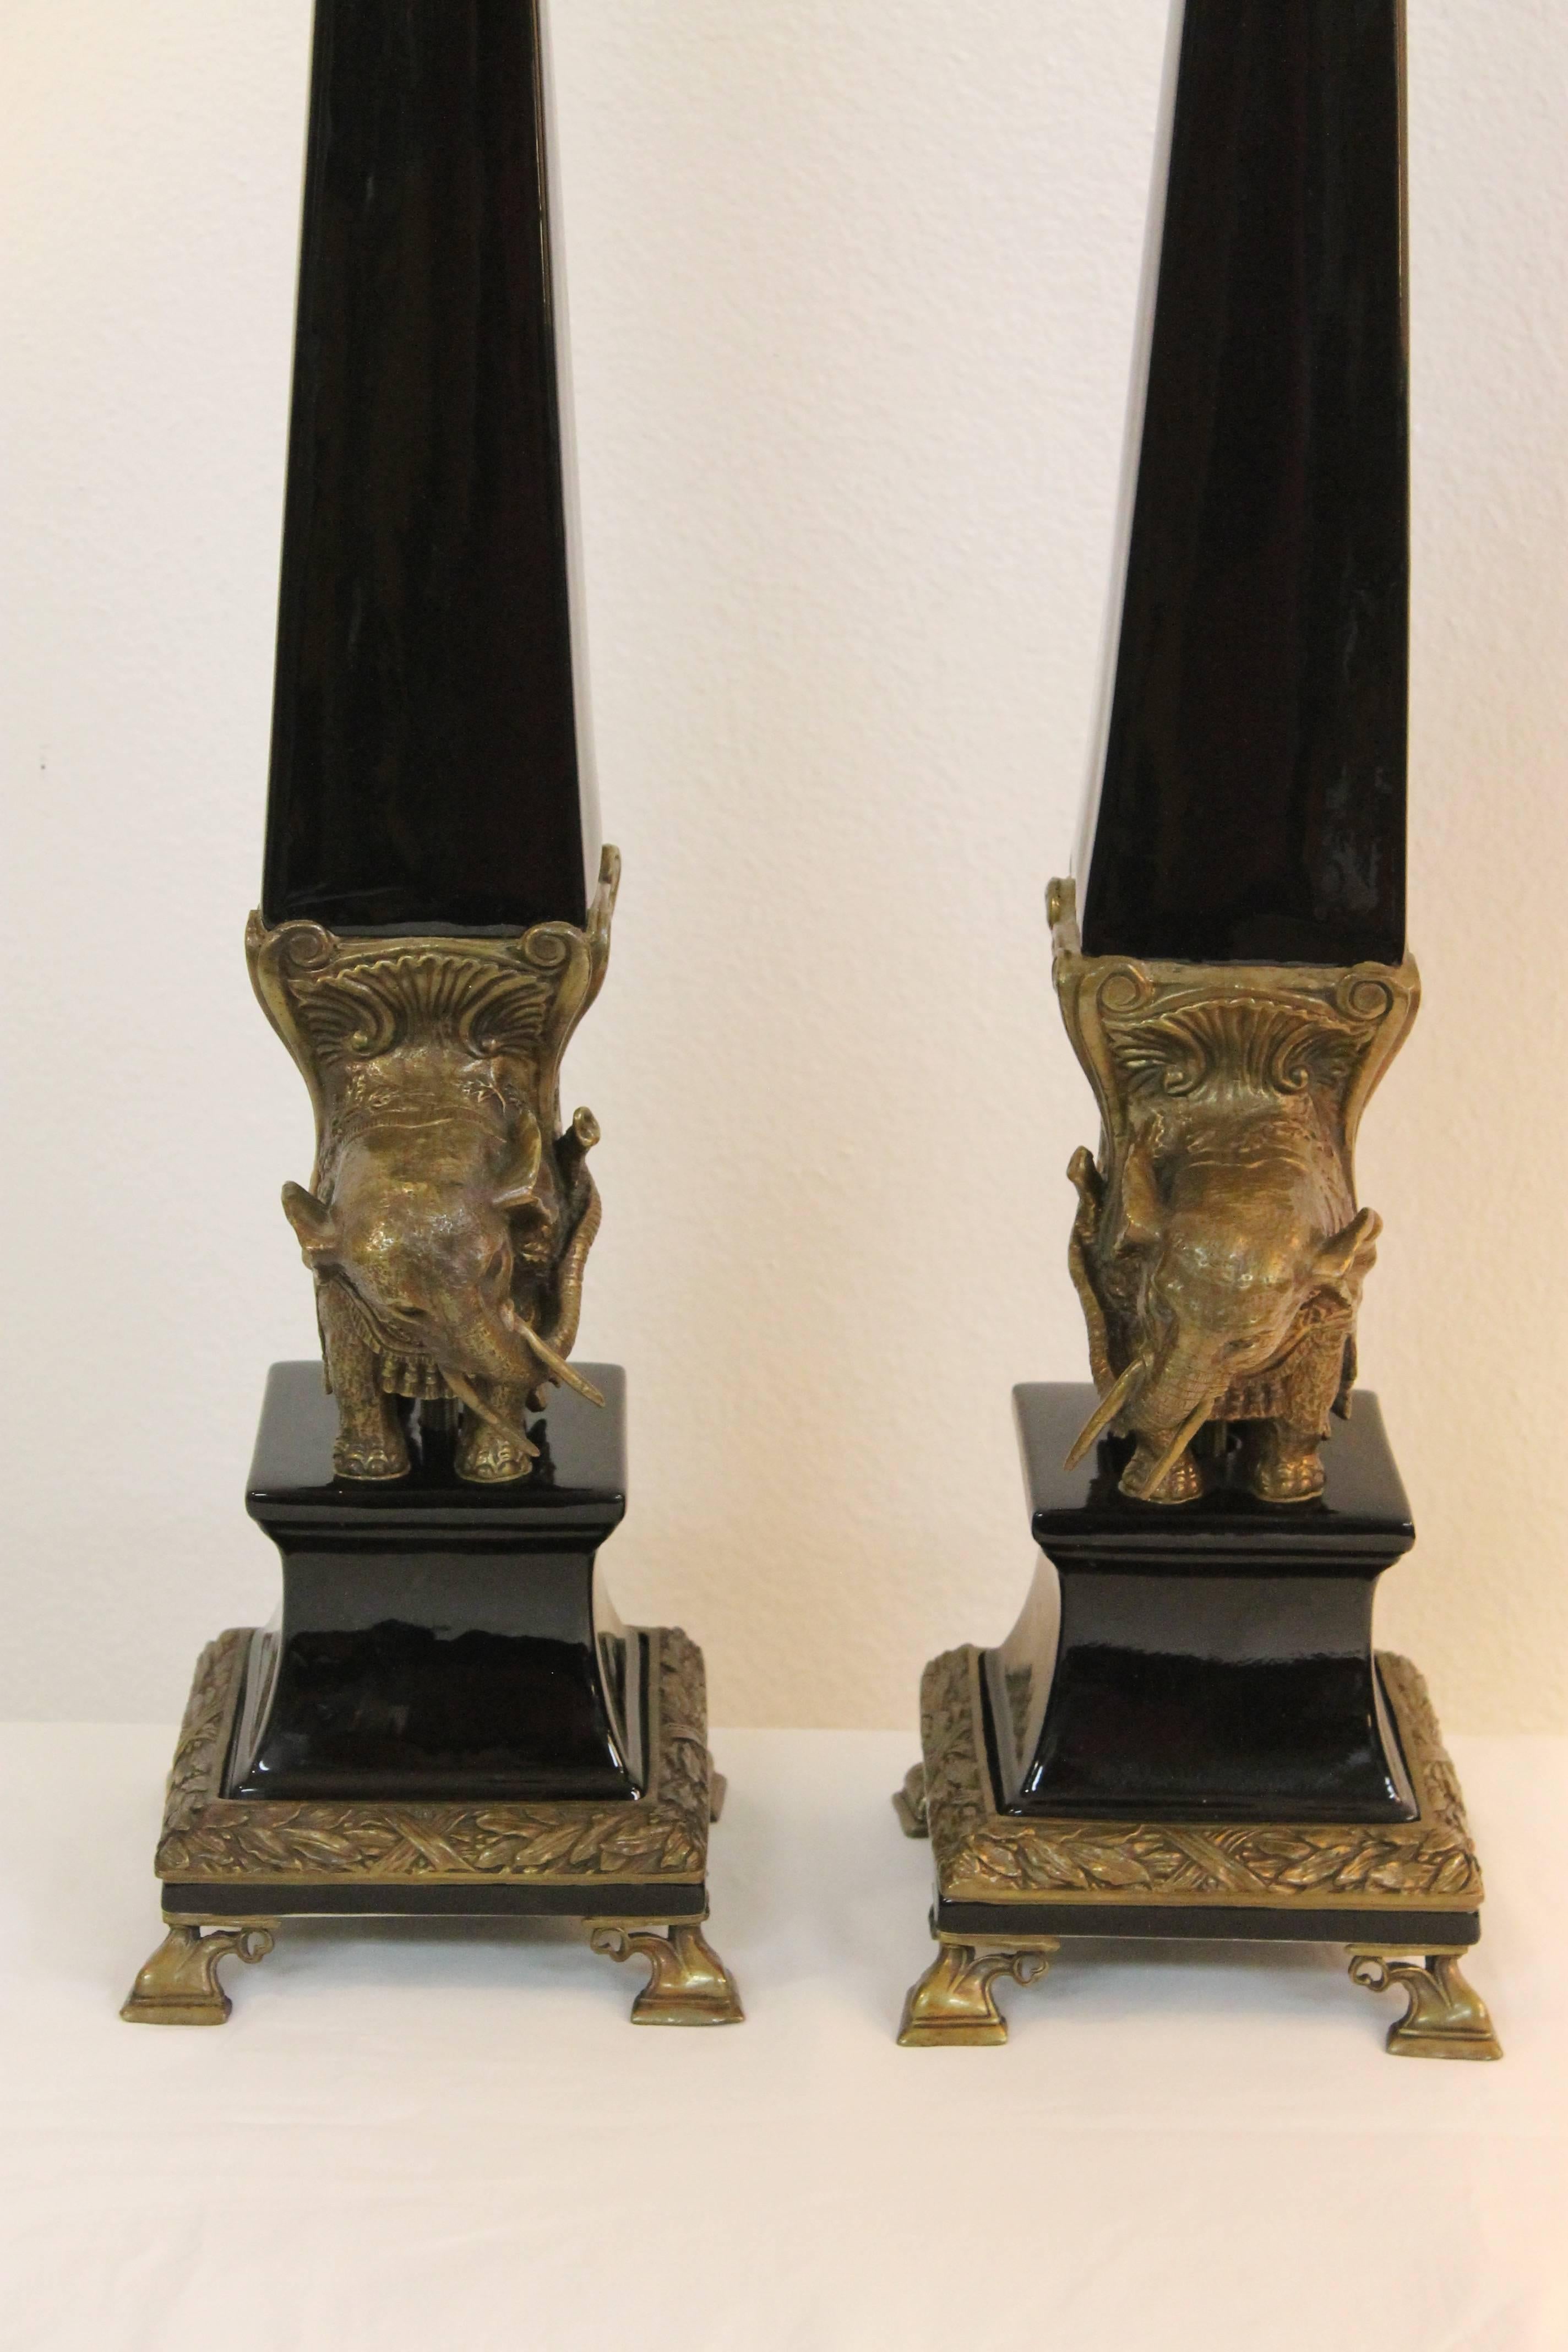 A matched pair of cast brass elephant lamps with black glazed porcelain obelisks. Elephants are modeled after the 1667 sculpture by Bernini in Rome. Very finely detailed castings and high quality construction on these lamps. These are newly rewired.